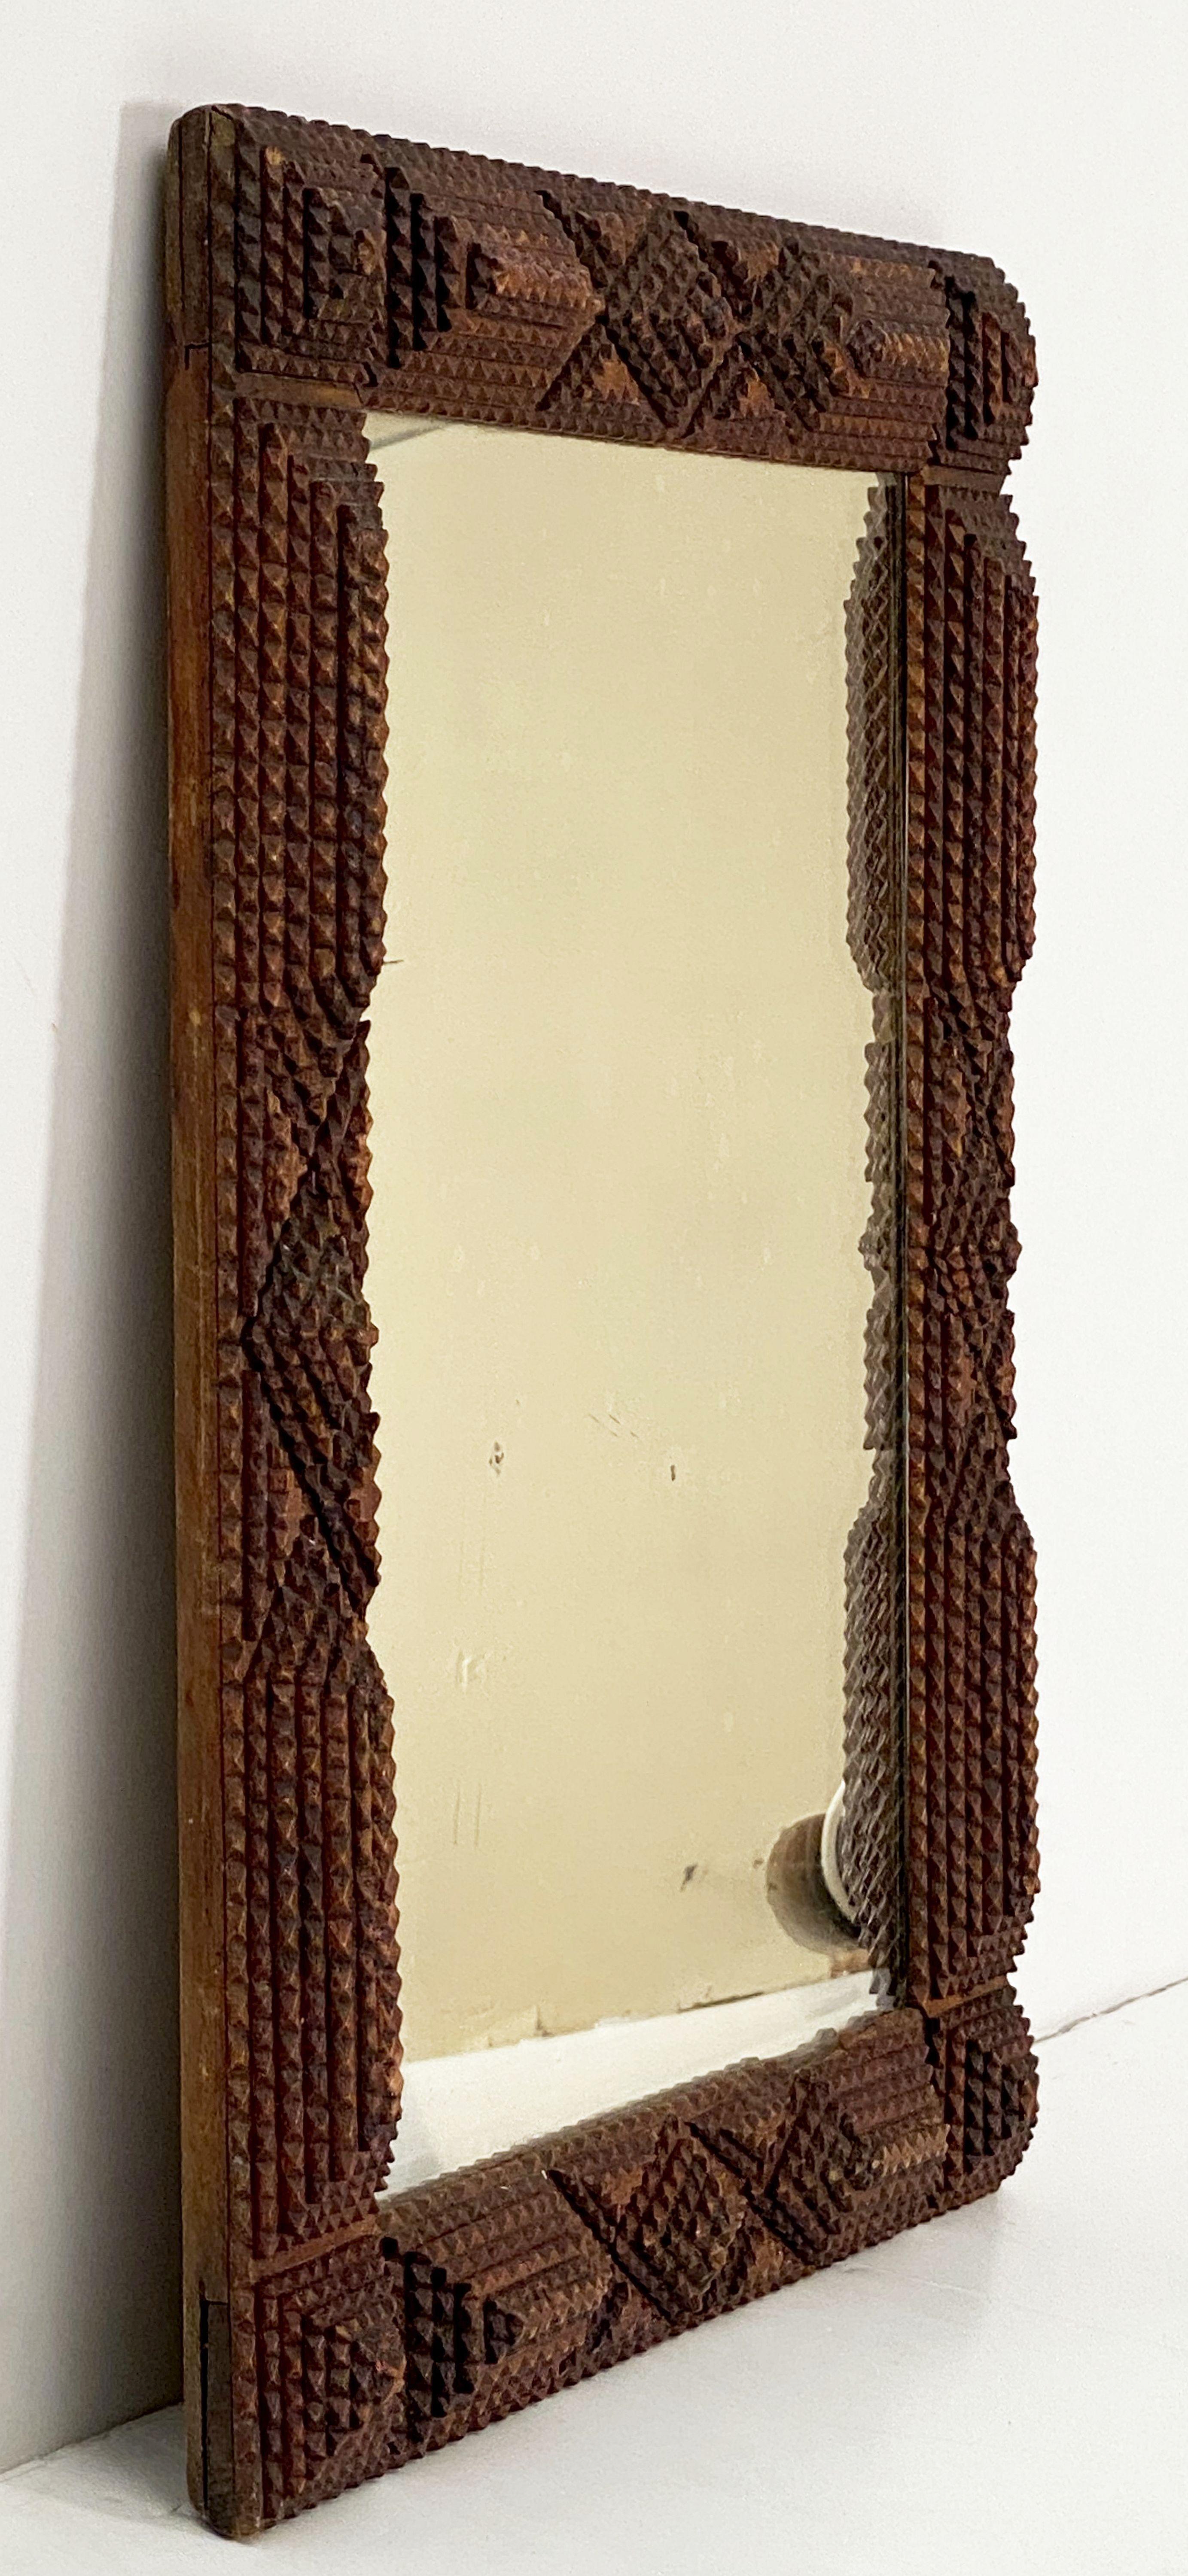 A vintage English Tramp Art mirror featuring a rectangular frame with an ornamental relief design. 

Dimensions are 20 1/4 inches x 16 1/2 inches.

Tramp Art was an art movement found throughout the world where small pieces of wood, primarily